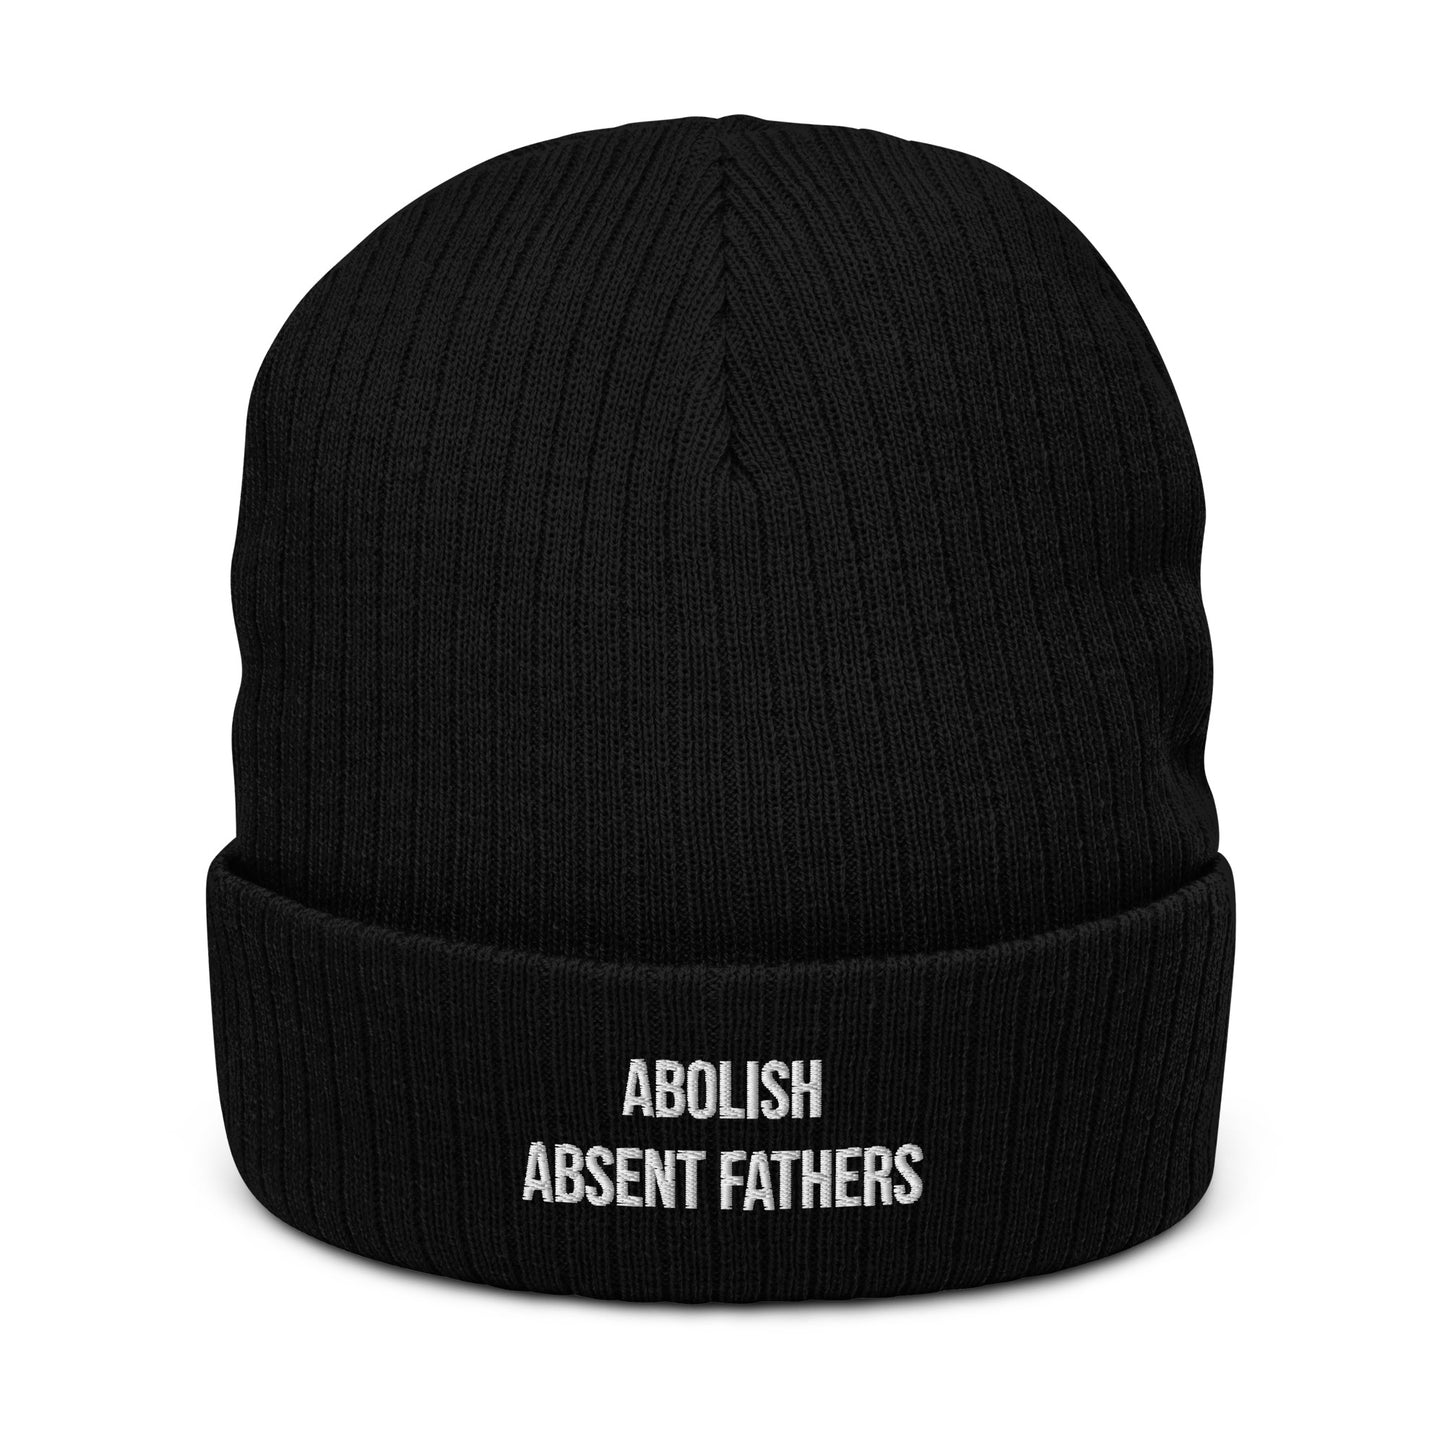 Abolish Absent Fathers Embroidered Unisex Beanie